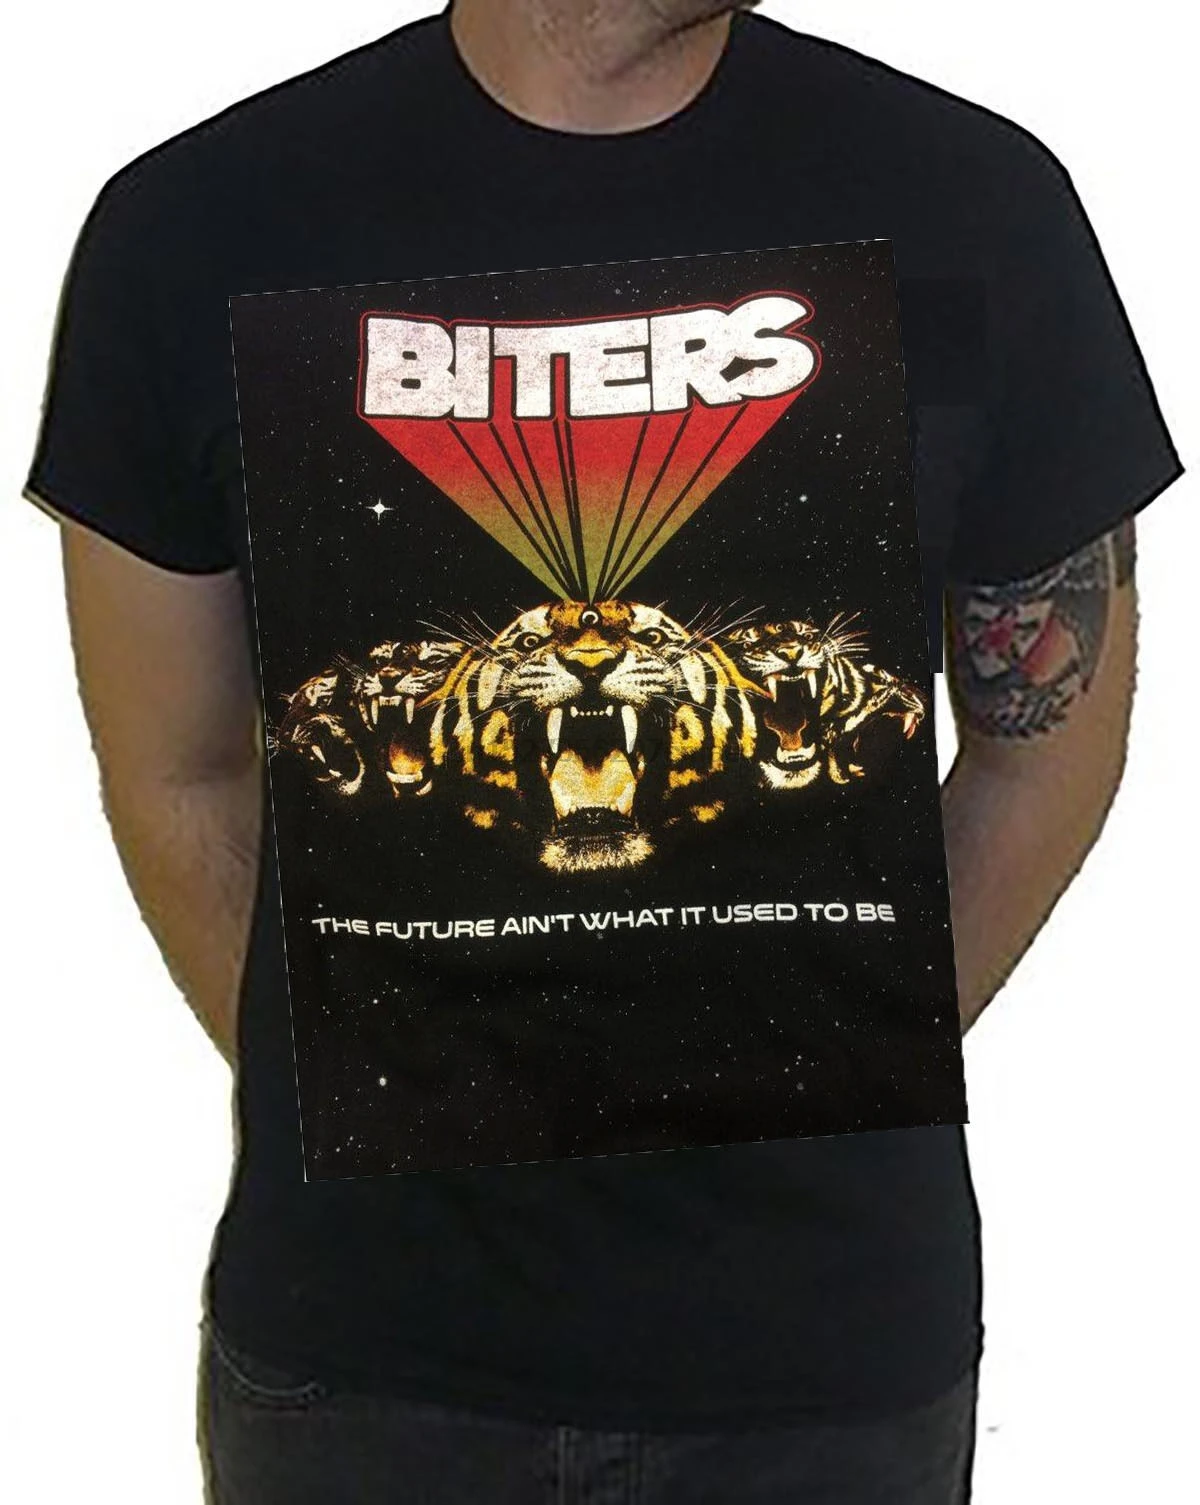 

Biters 'The Future Ain't What It Used To Be' T shirt - NEW(1)